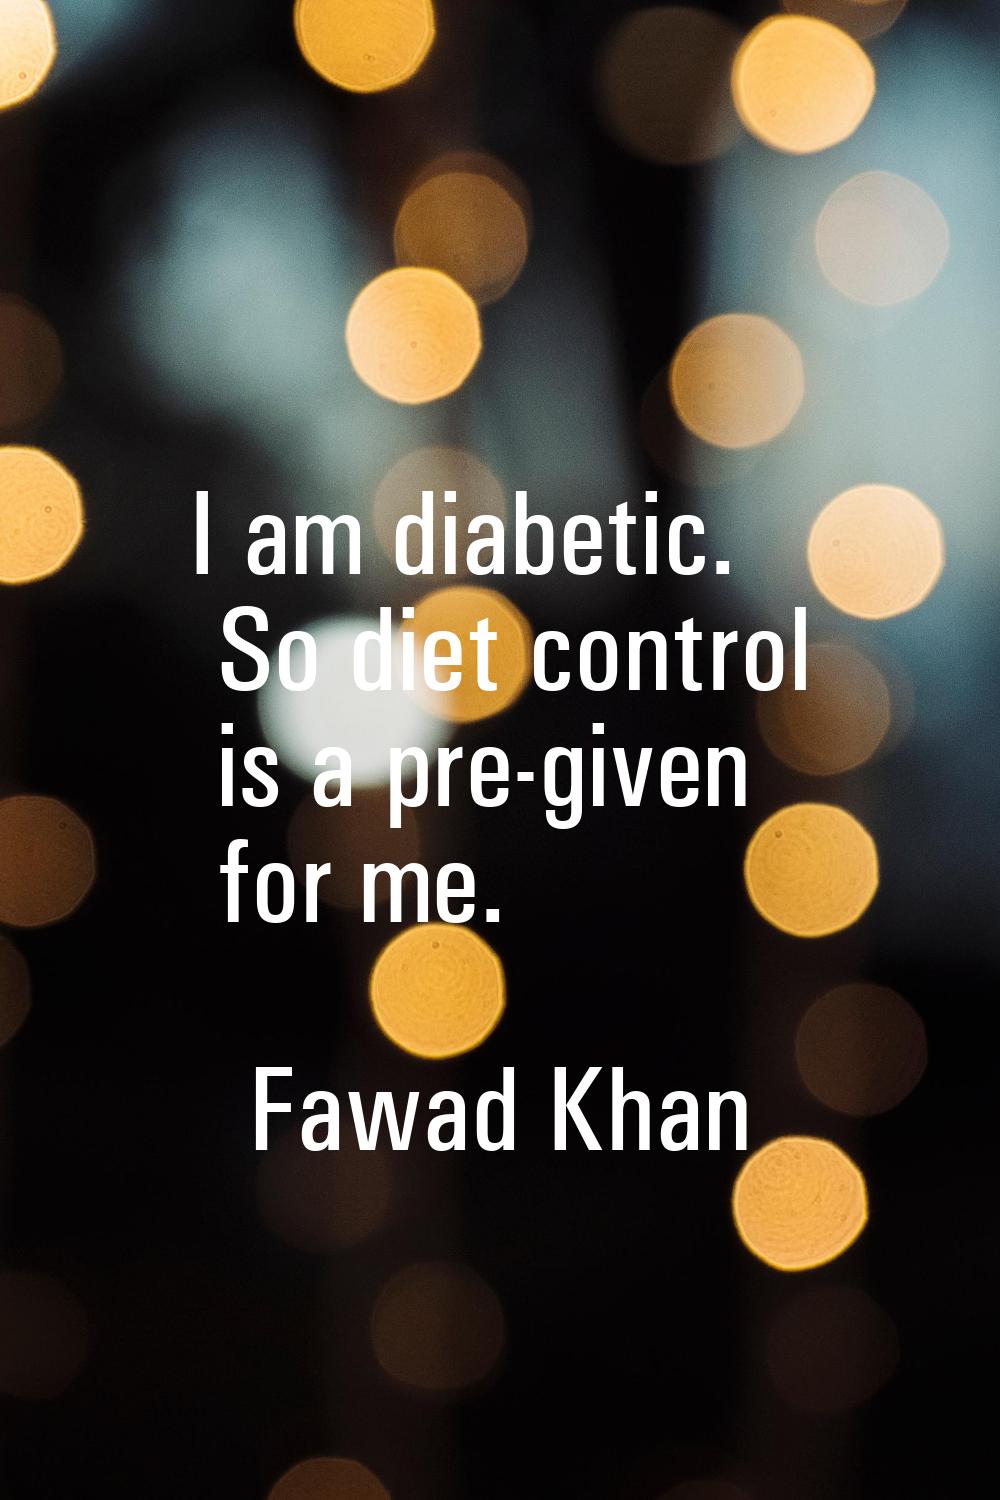 I am diabetic. So diet control is a pre-given for me.